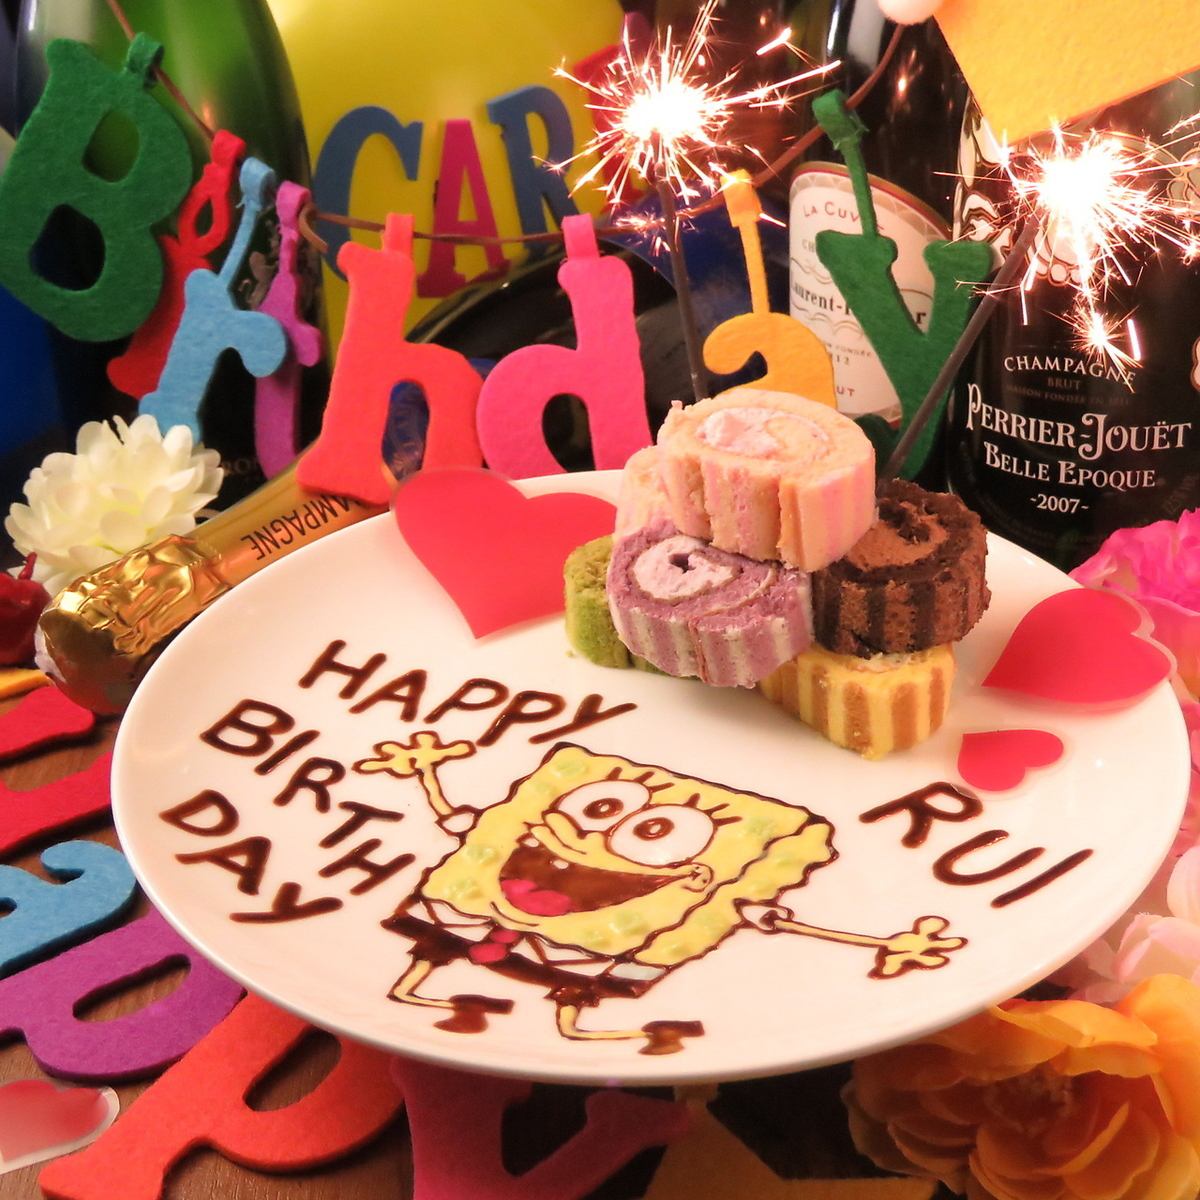 ★ Super! Surprise with a birthday plate created by a great chef ★